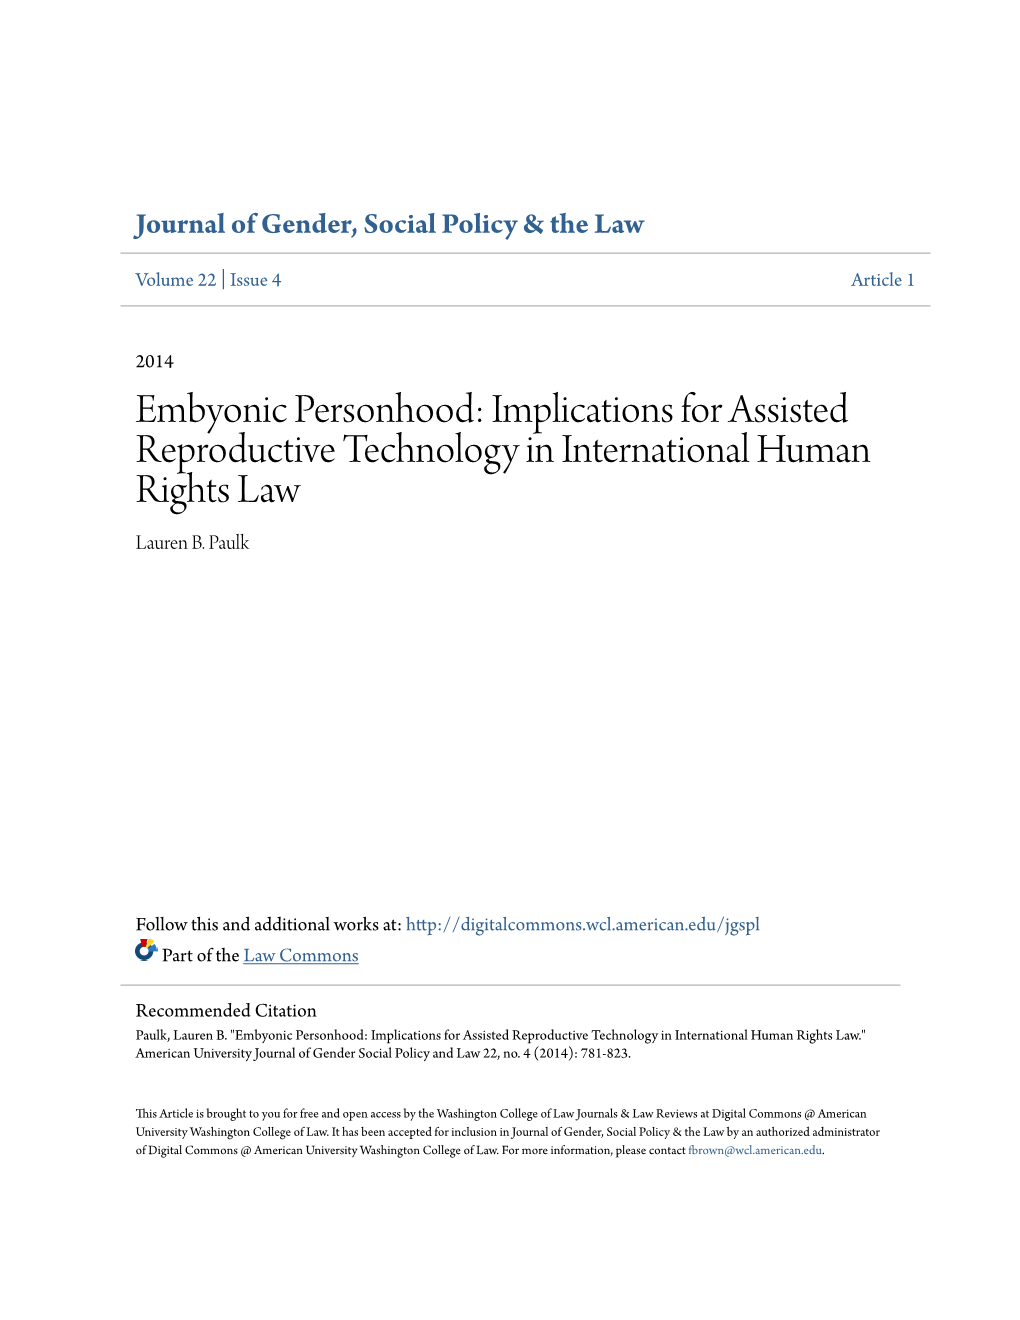 Implications for Assisted Reproductive Technology in International Human Rights Law Lauren B